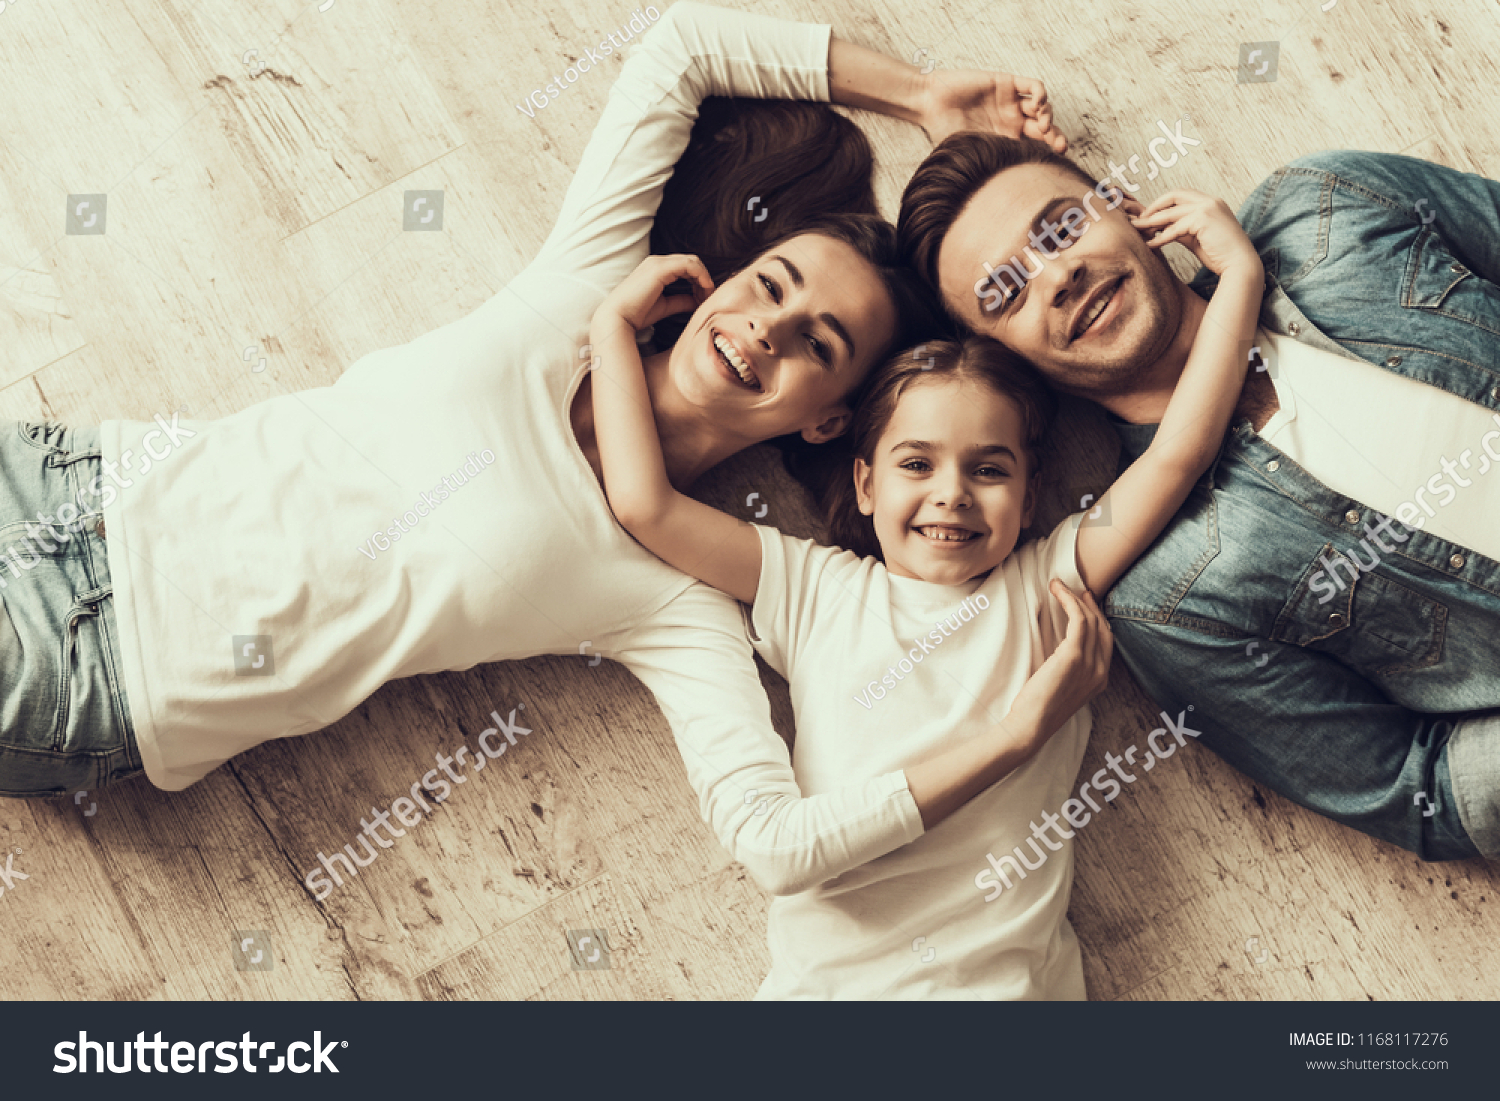 Happy Family Lying of Floor Together at Home. Beautiful Woman Handsome Man and Adorable Little Girl Lying on Parquet Floor and Hugging. Parents and Child Together. Family and Parenthood Concept #1168117276